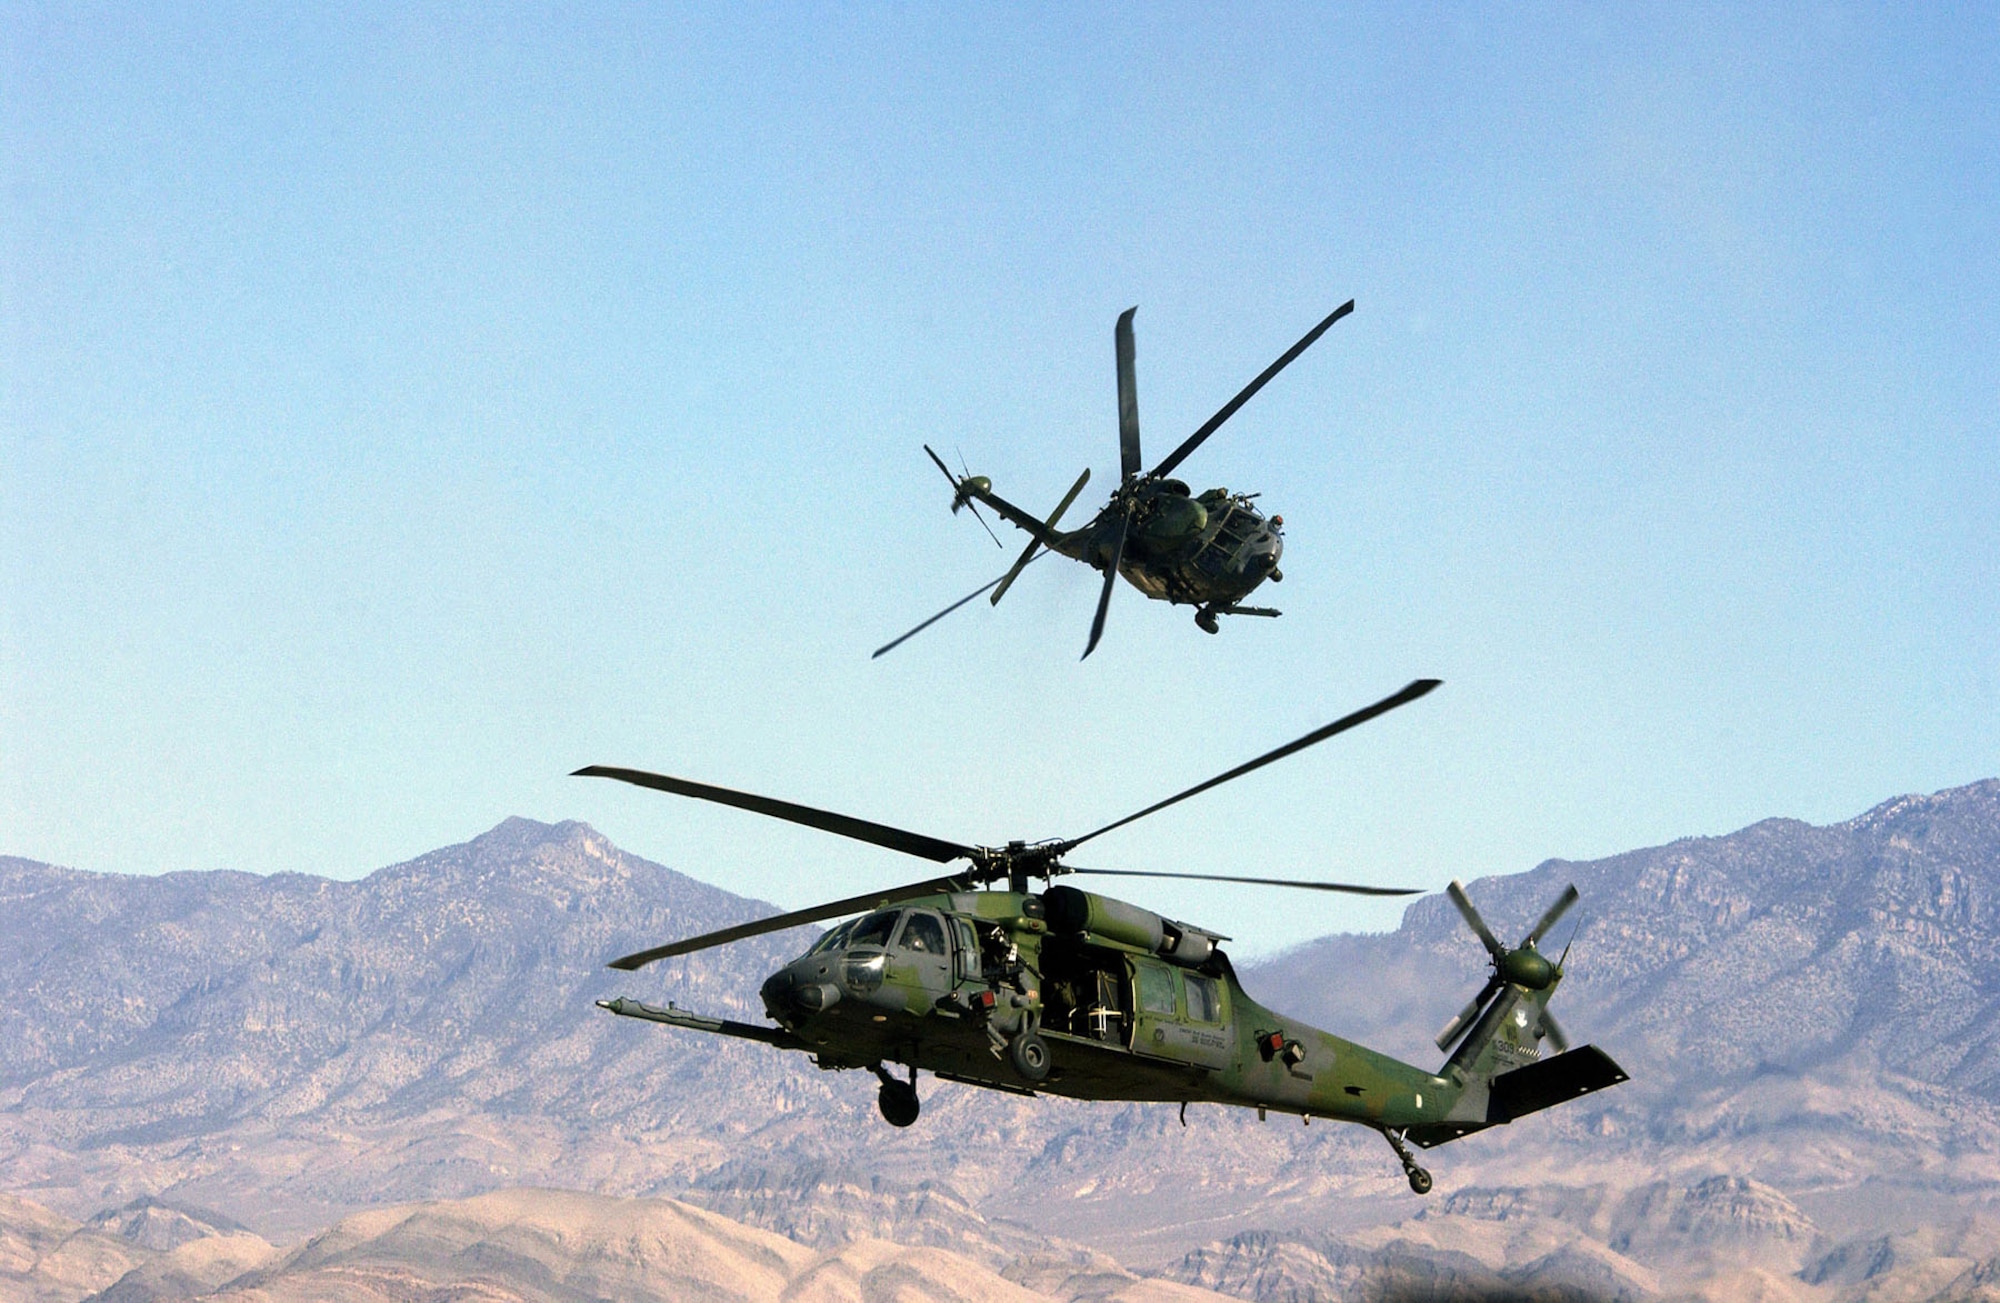 66th Rescue Squadron Pave Hawk helicopters. (U.S. Air Force photo)